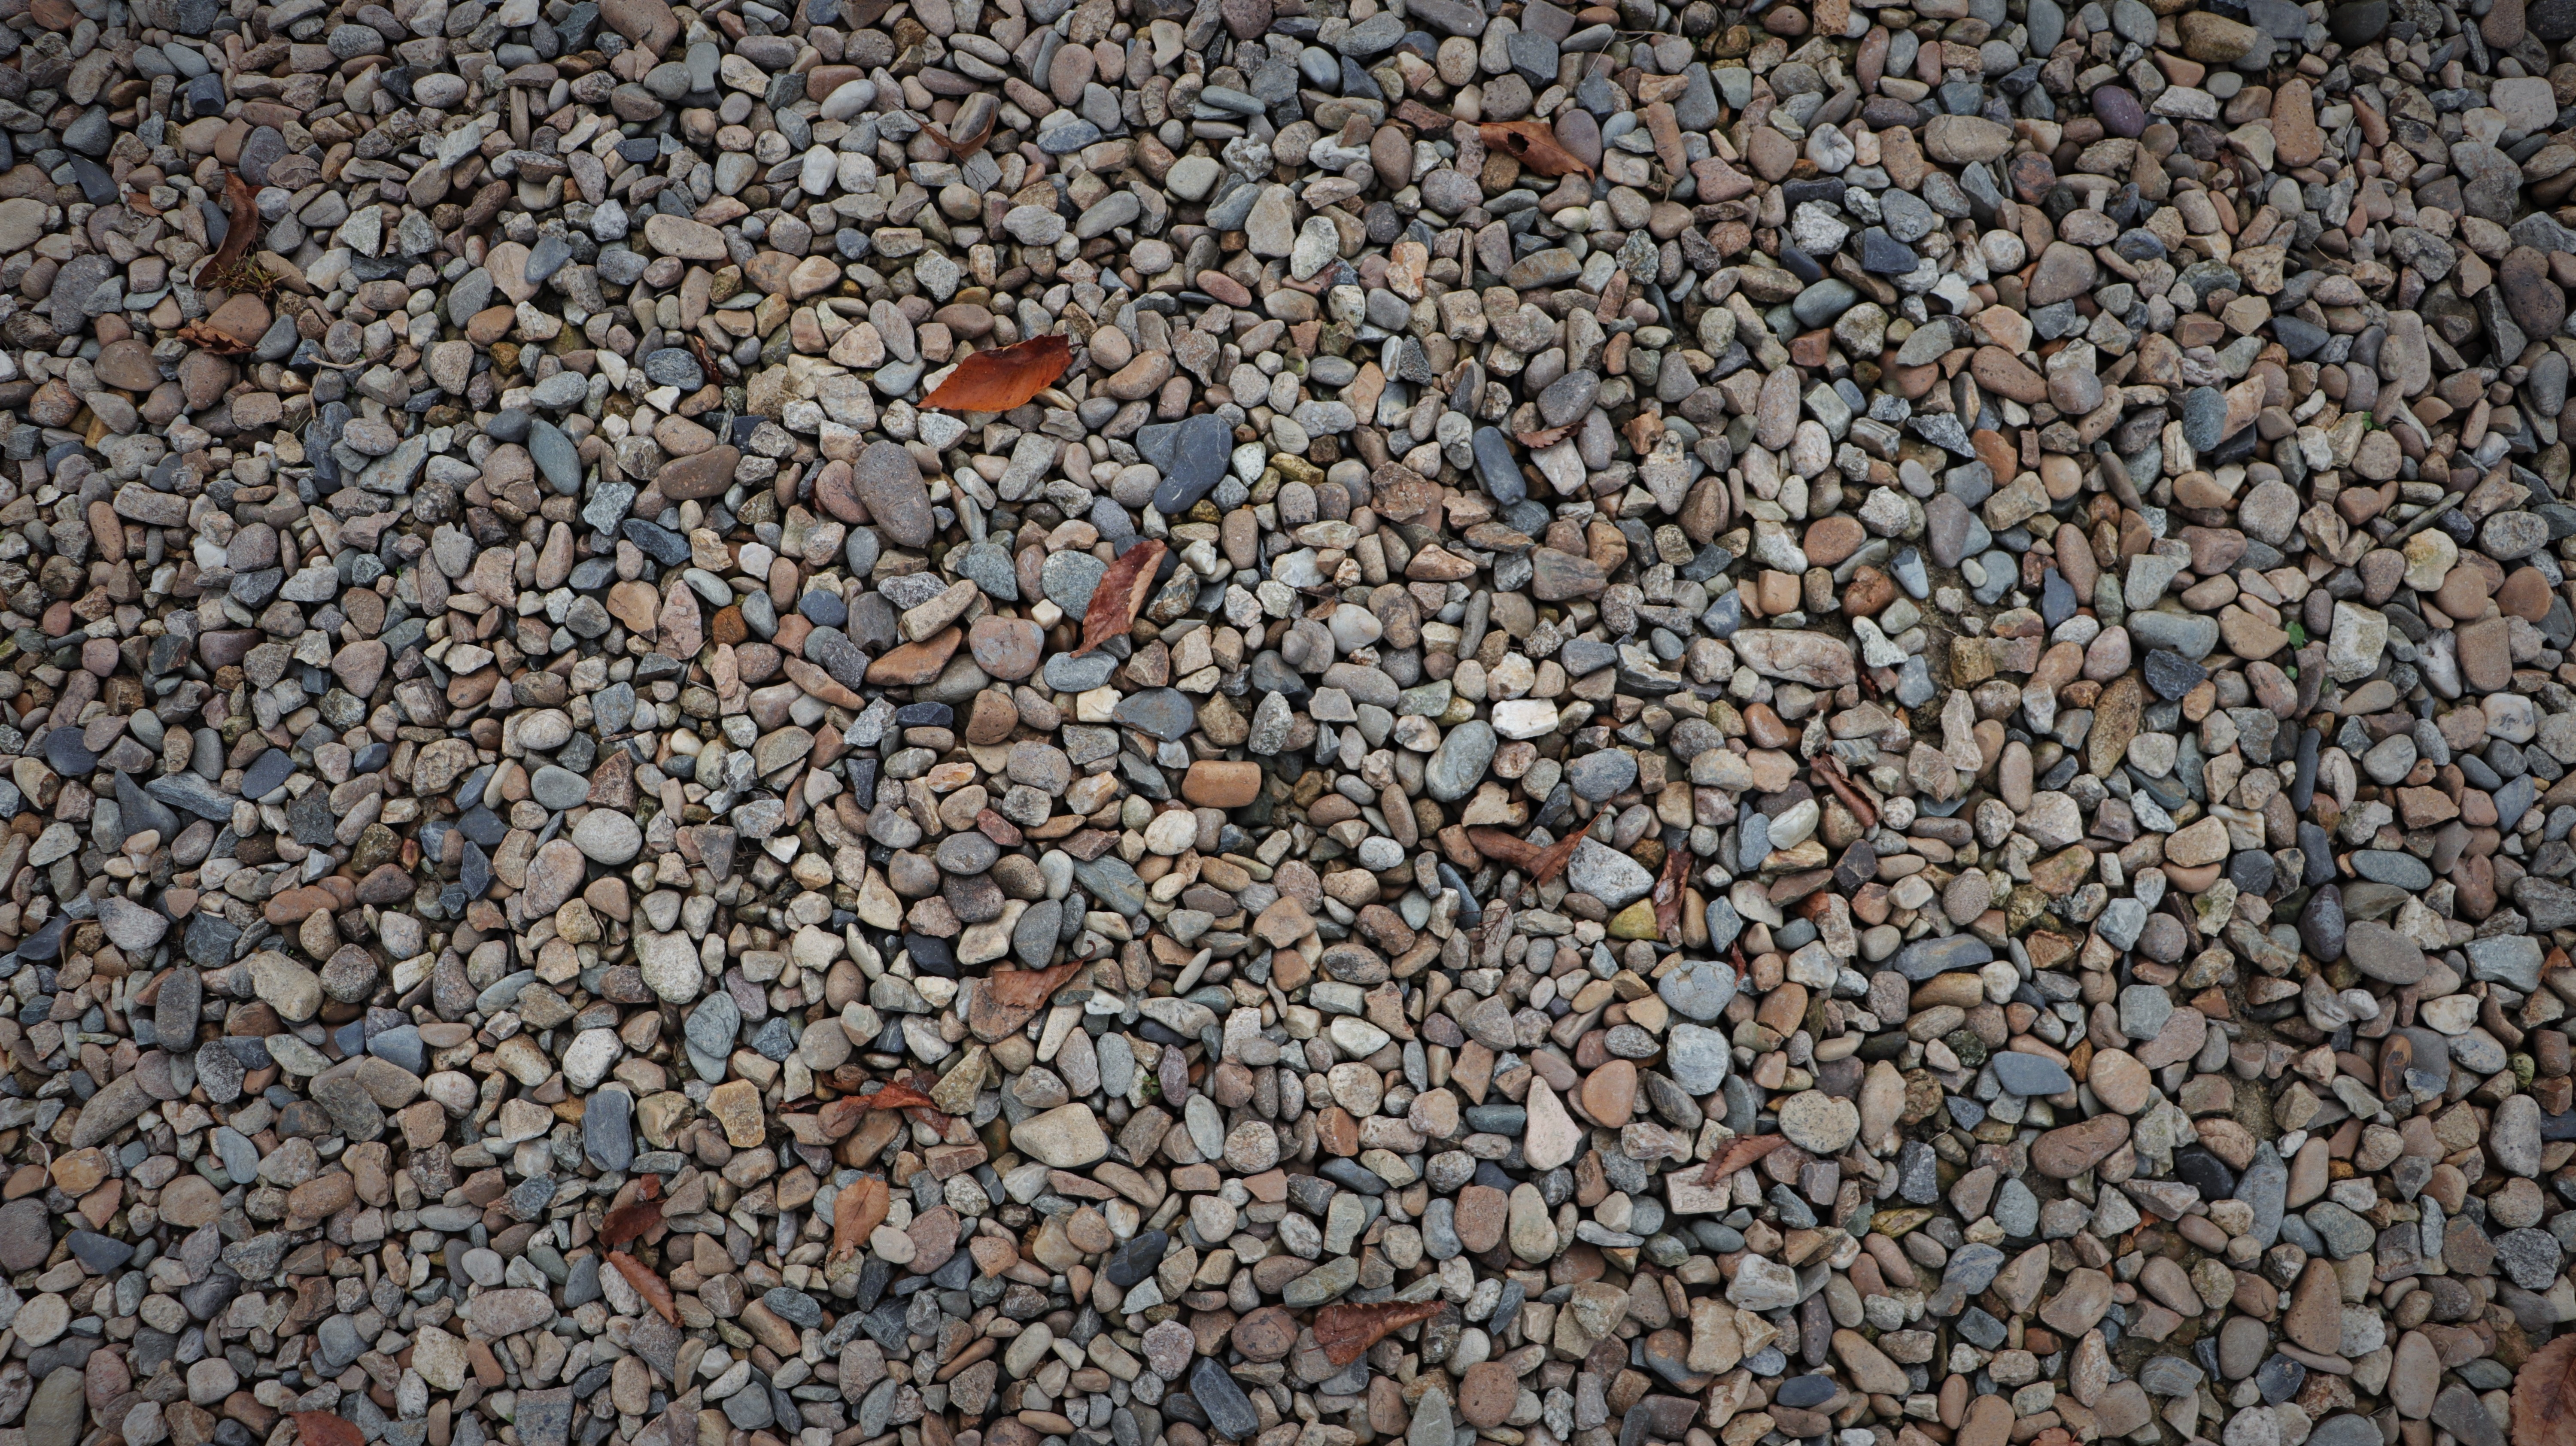 75931 download wallpaper stones, nature, pebble, nautical, maritime, crushed stone, macadam screensavers and pictures for free